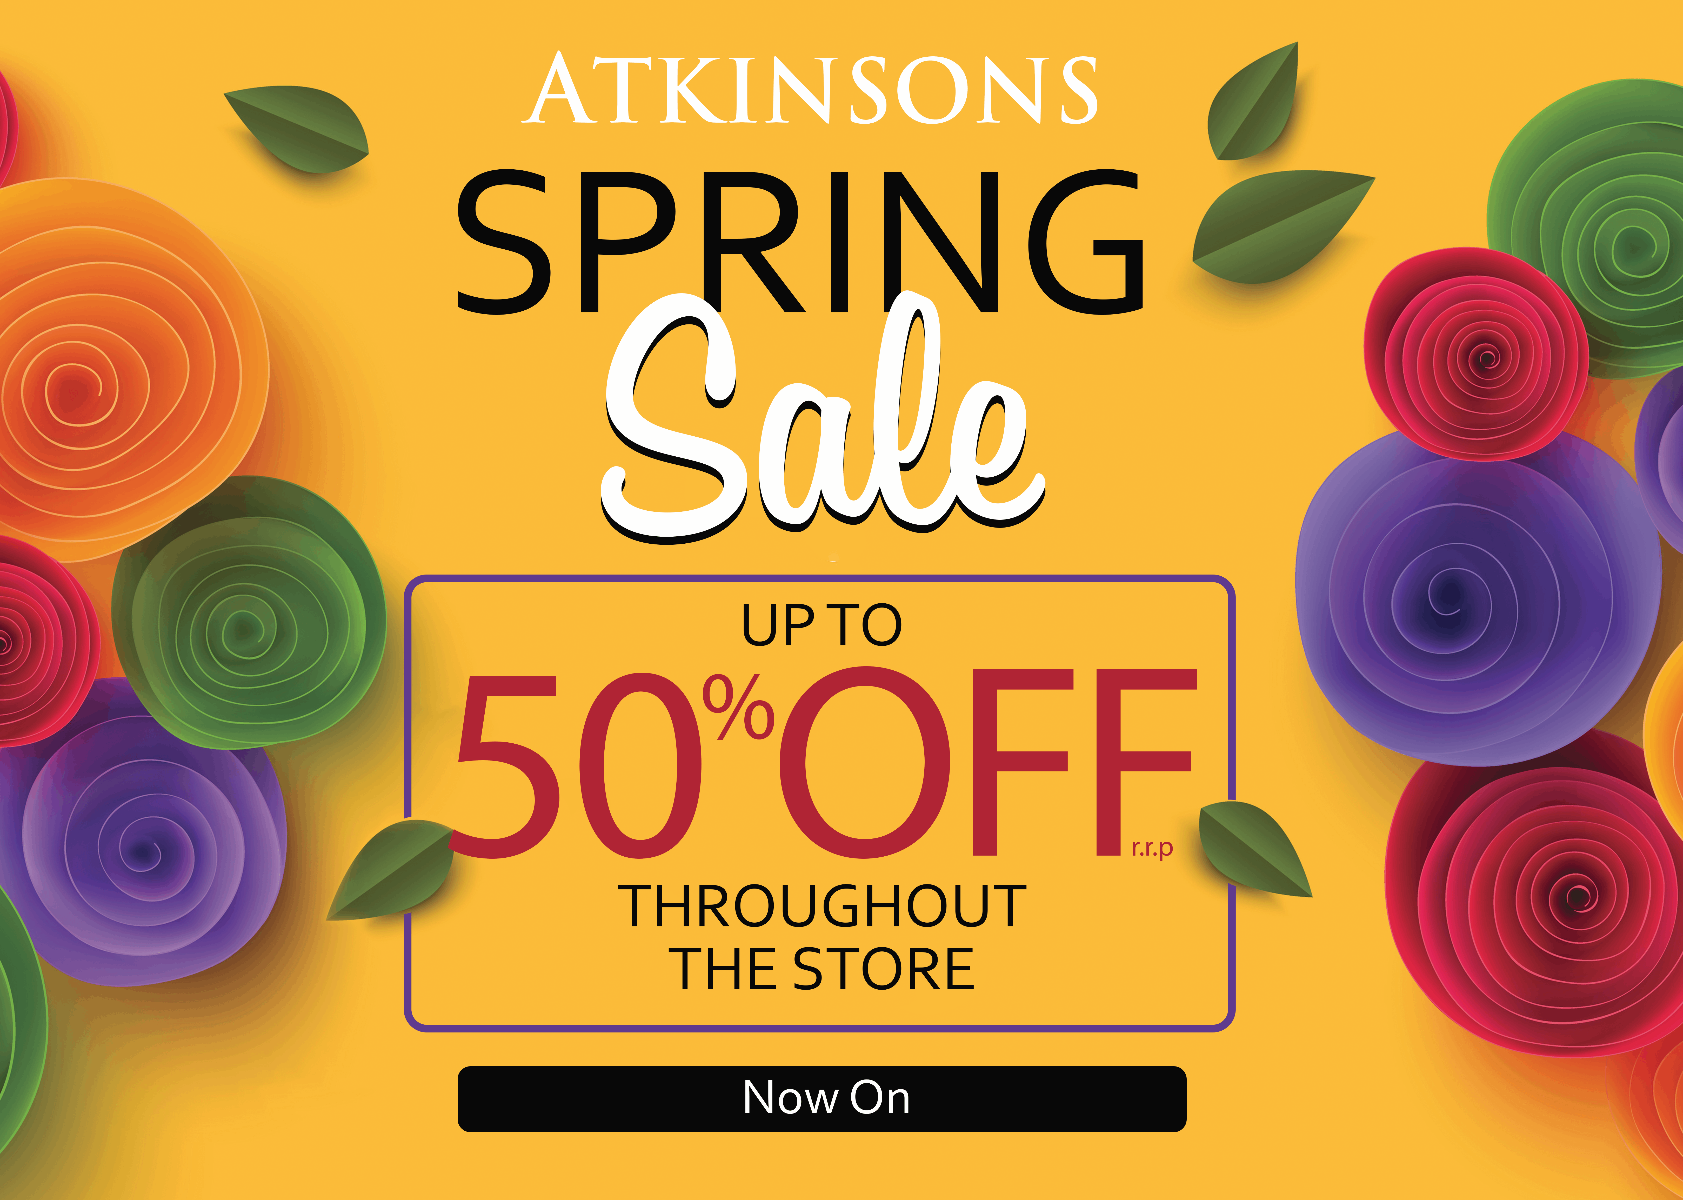 Spring Sale Now On at Atkinsons Sheffield